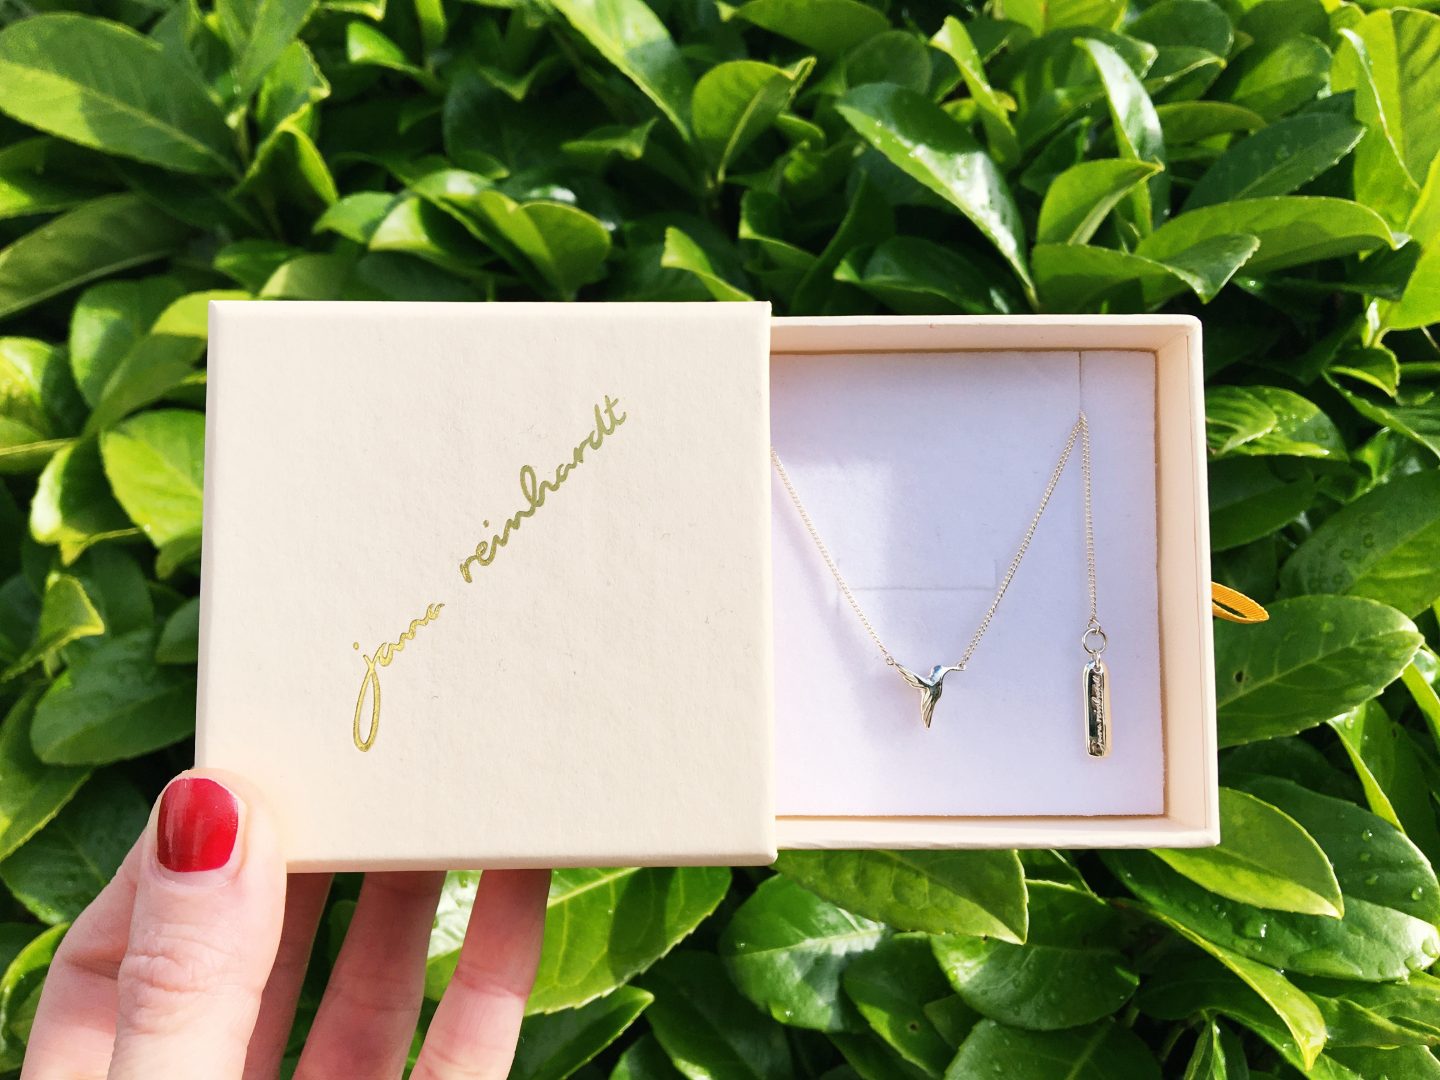 A photo of the gift box and Jana Reinhardt silver hummingbird necklace inside that I was kindly gifted for this review. I'm holding the box up against the lush green leaves of a plant in my back garden.